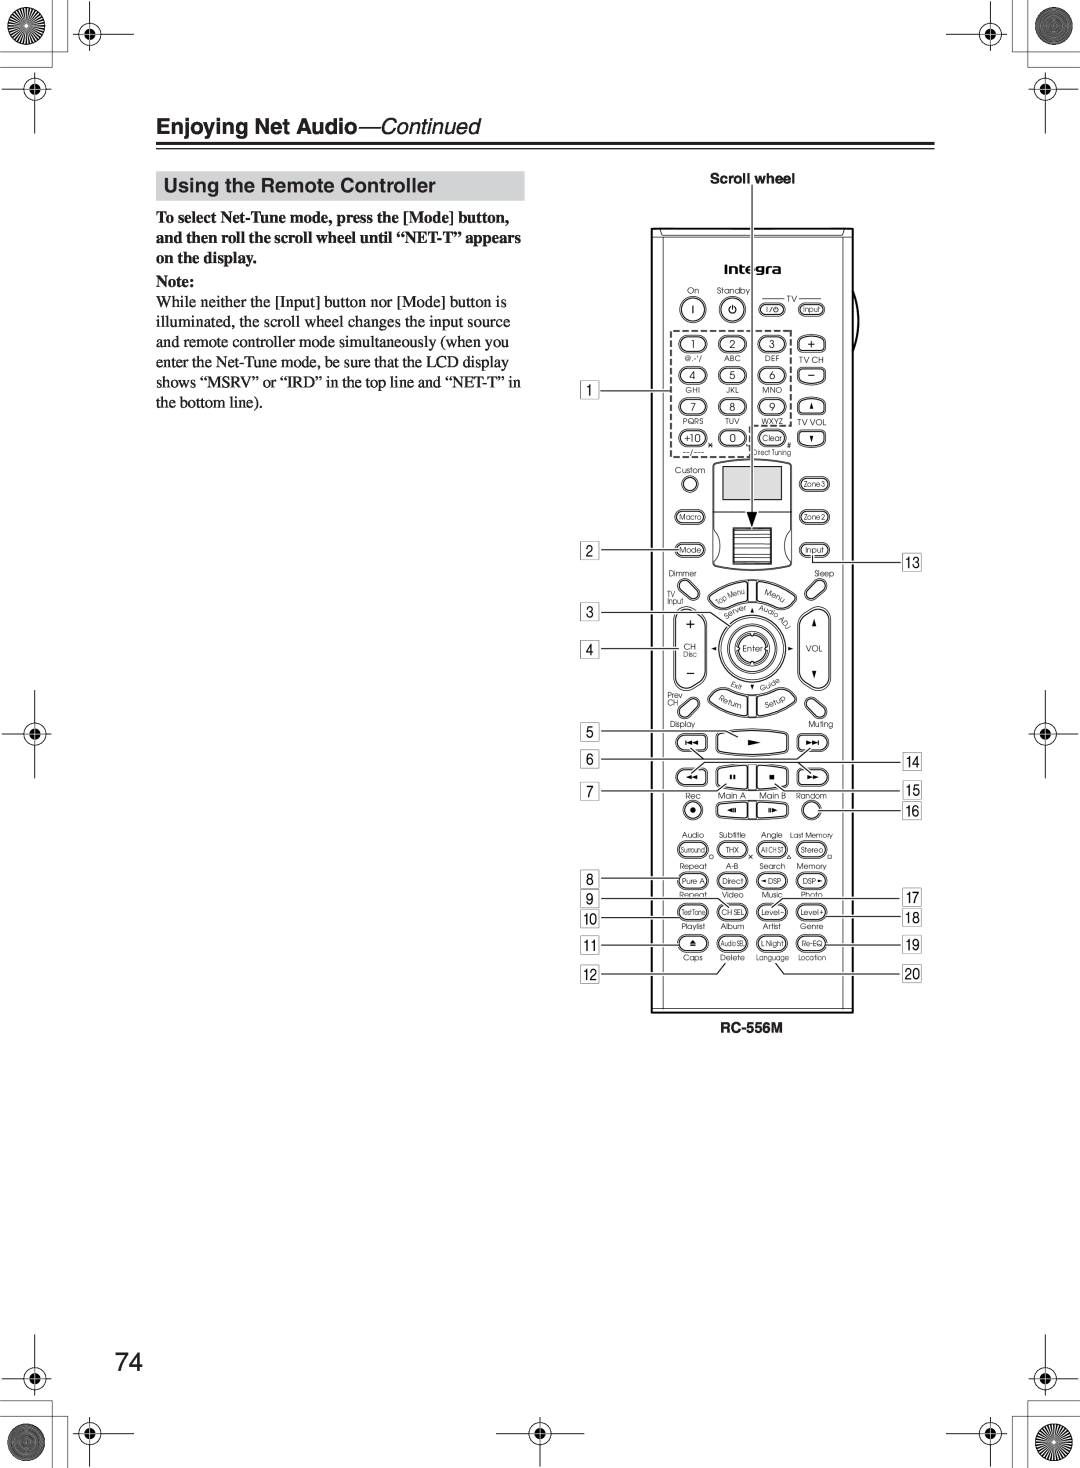 Integra DTR-10.5 instruction manual Enjoying Net Audio—Continued, Using the Remote Controller 